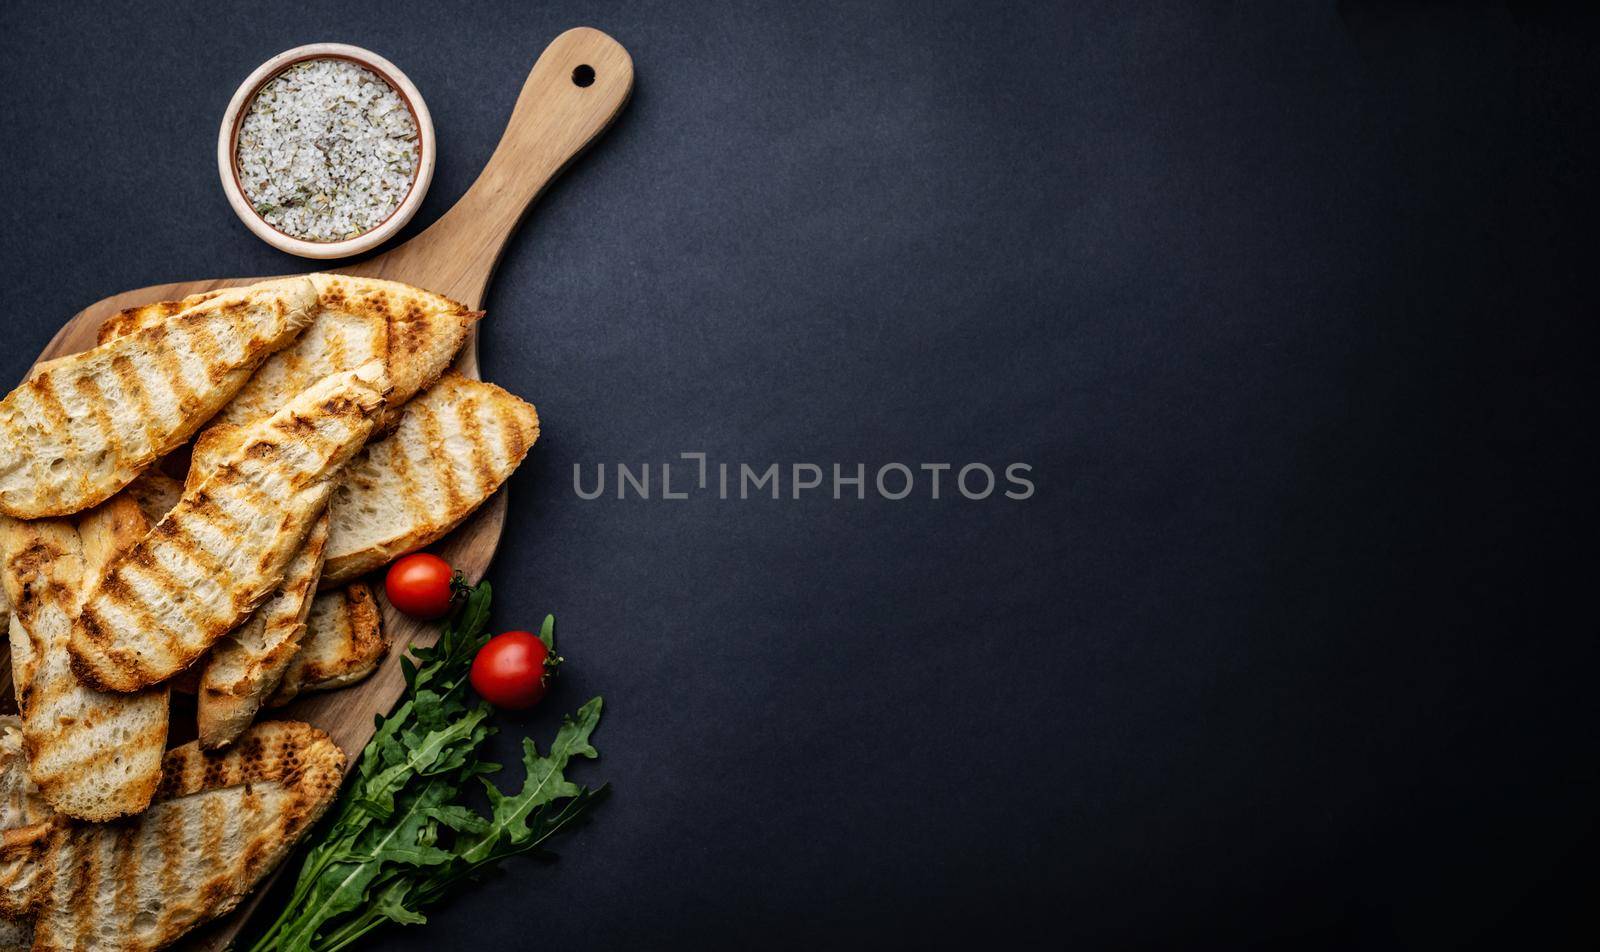 Toasts with cherry tomatoes, arugula and salt on wooden board on background with copyspace. Sliced toasted bread with vegetables and herbs